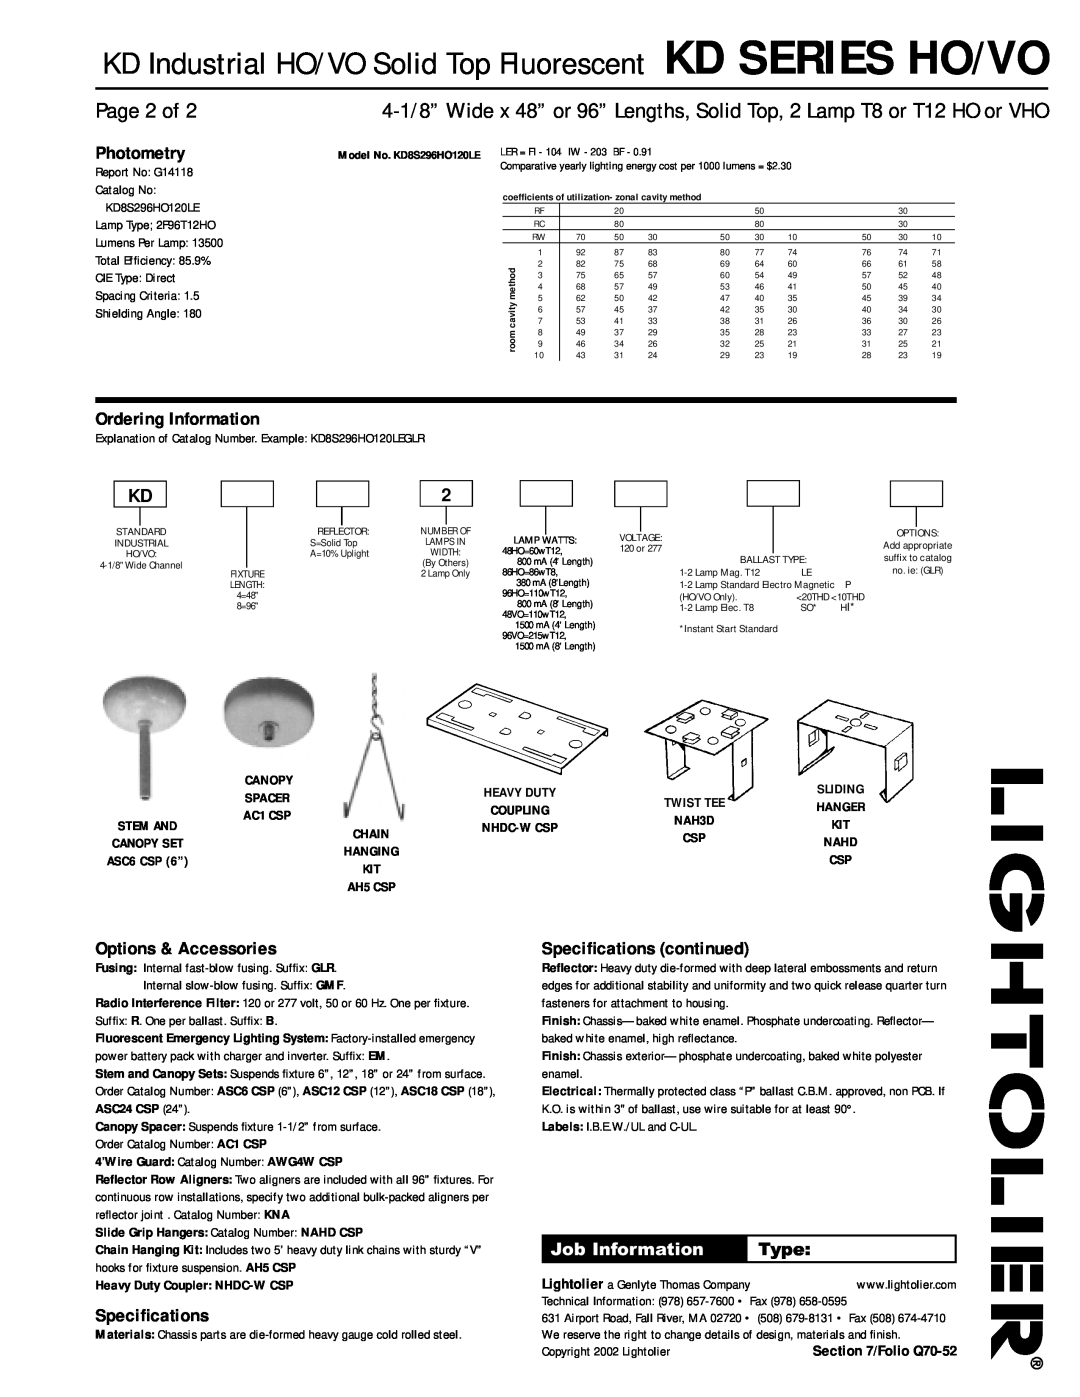 Lightolier KD SERIES VO Page 2 of, Photometry, Ordering Information, Options & Accessories, Speciﬁcations, Job Information 